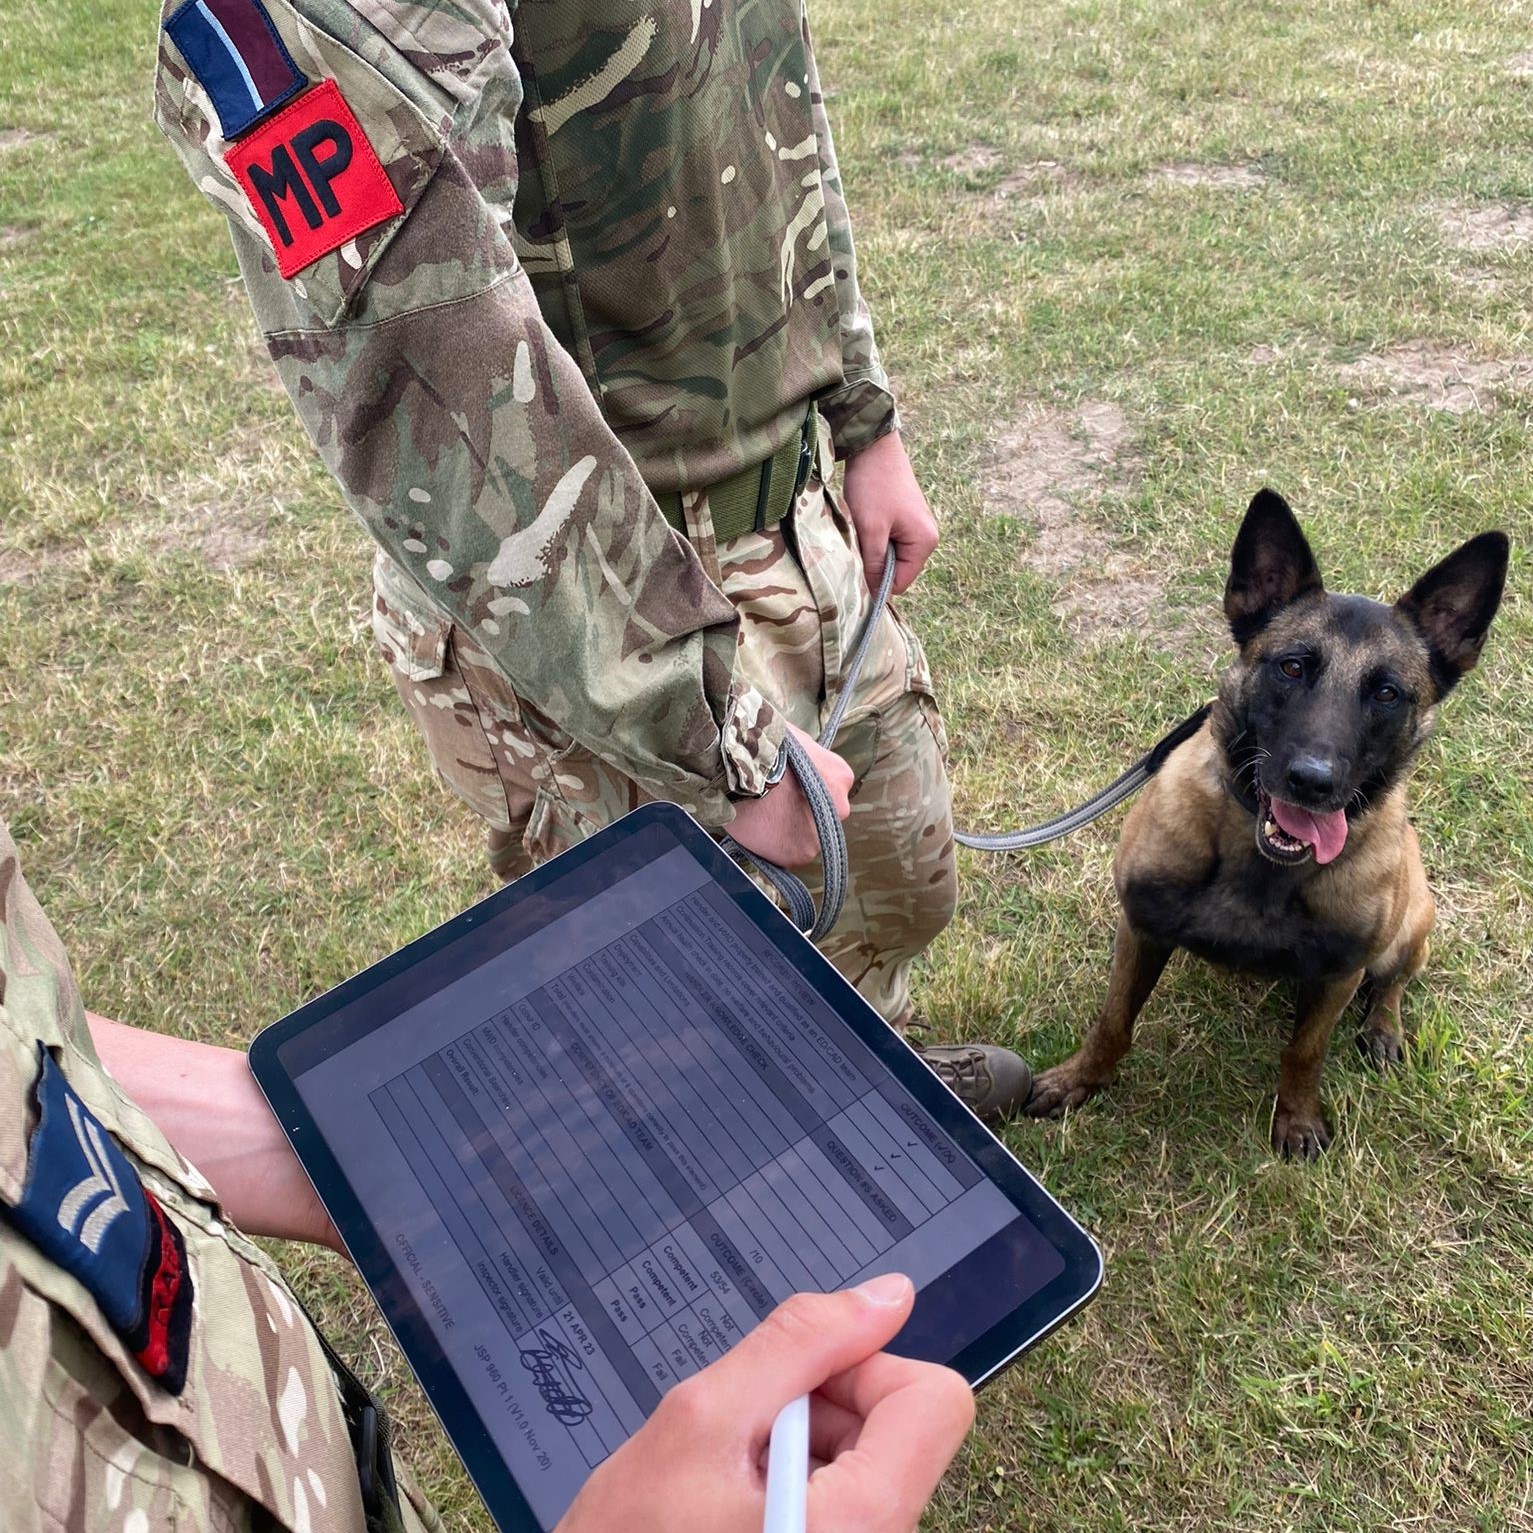 Image shows RAF Police using I-Pad and standing with their military working dog.